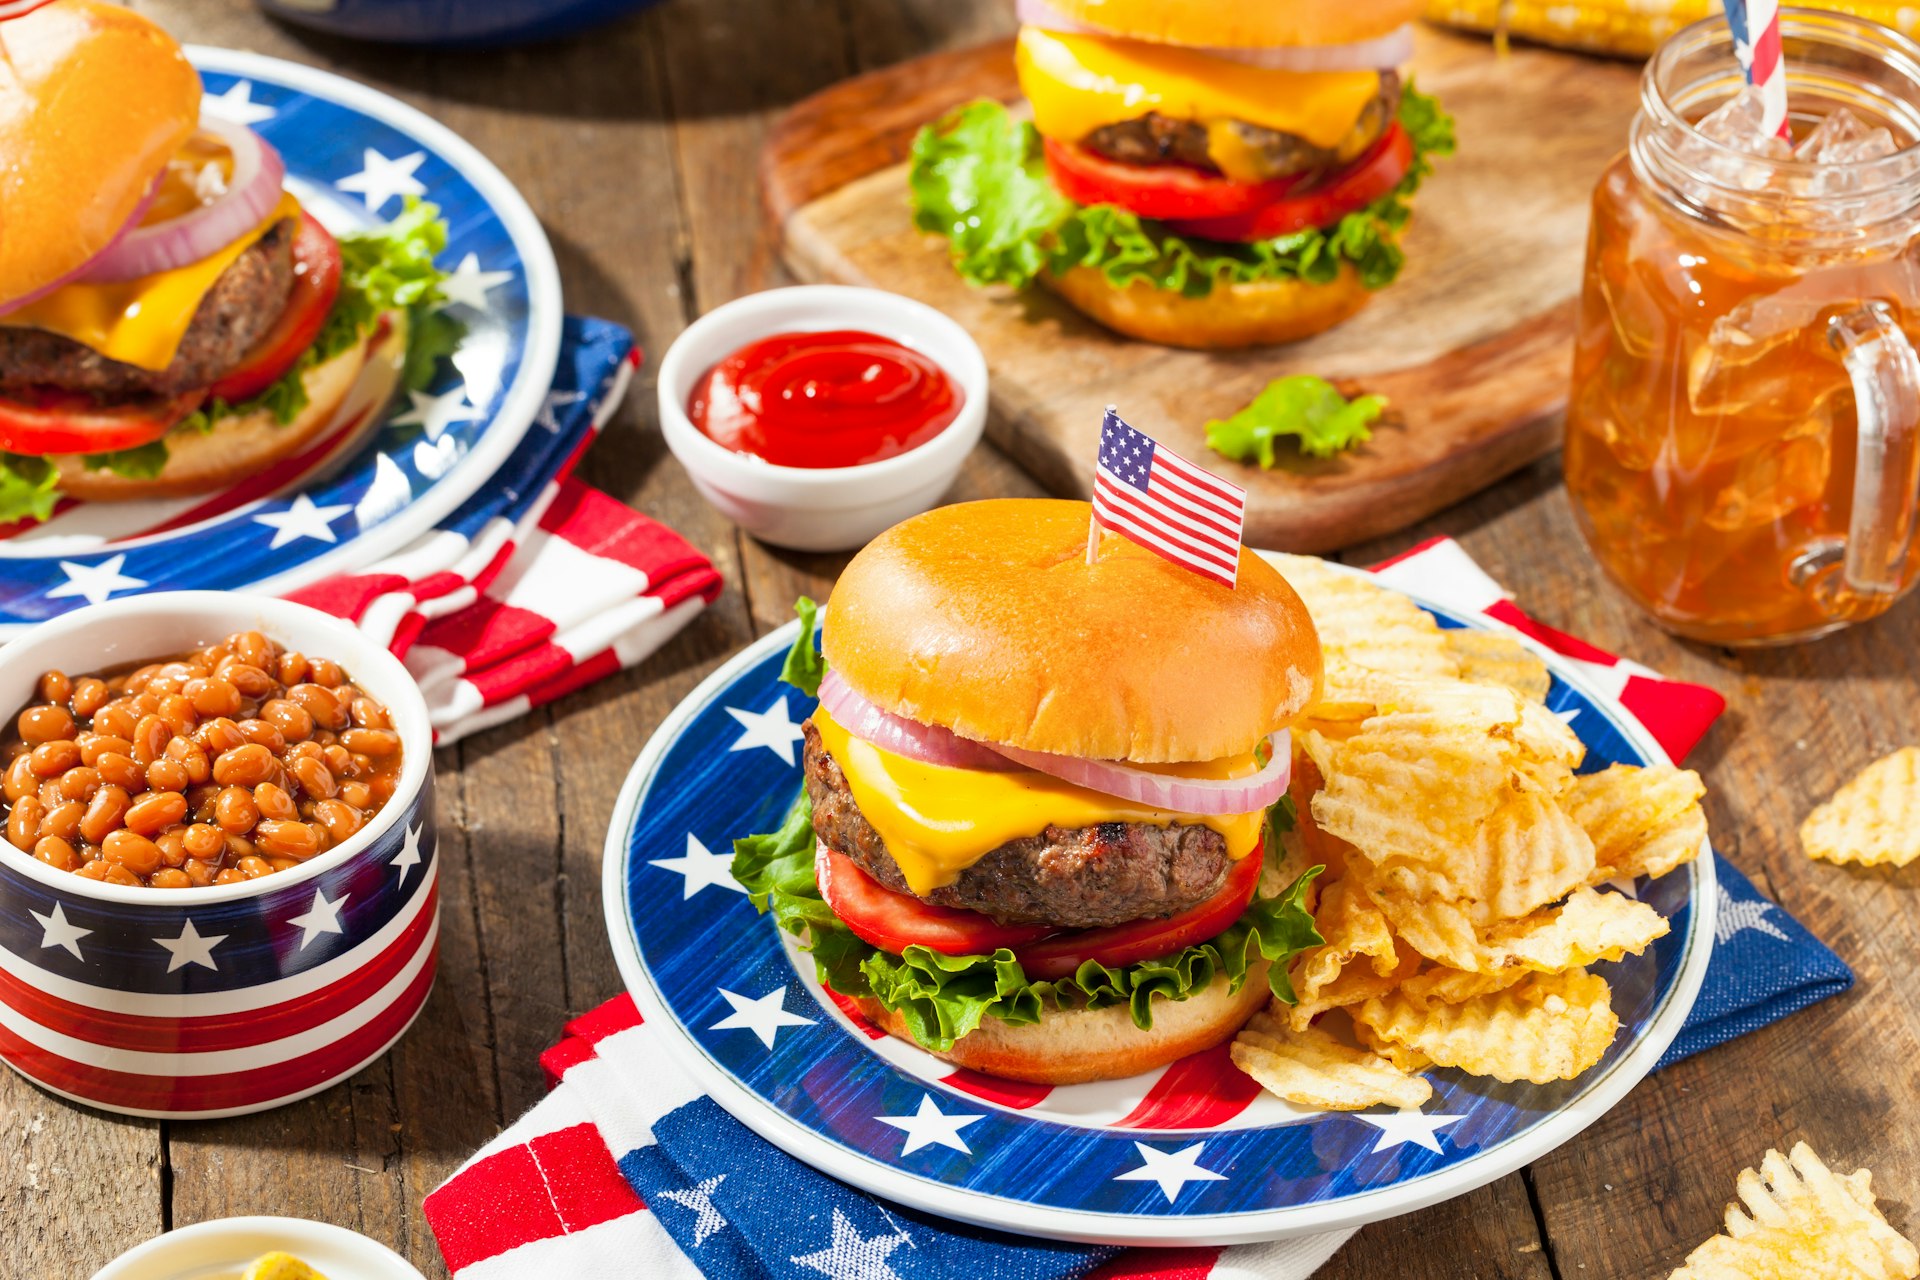 Celebrate the Fourth of July at home this year with an Independence Day picnic